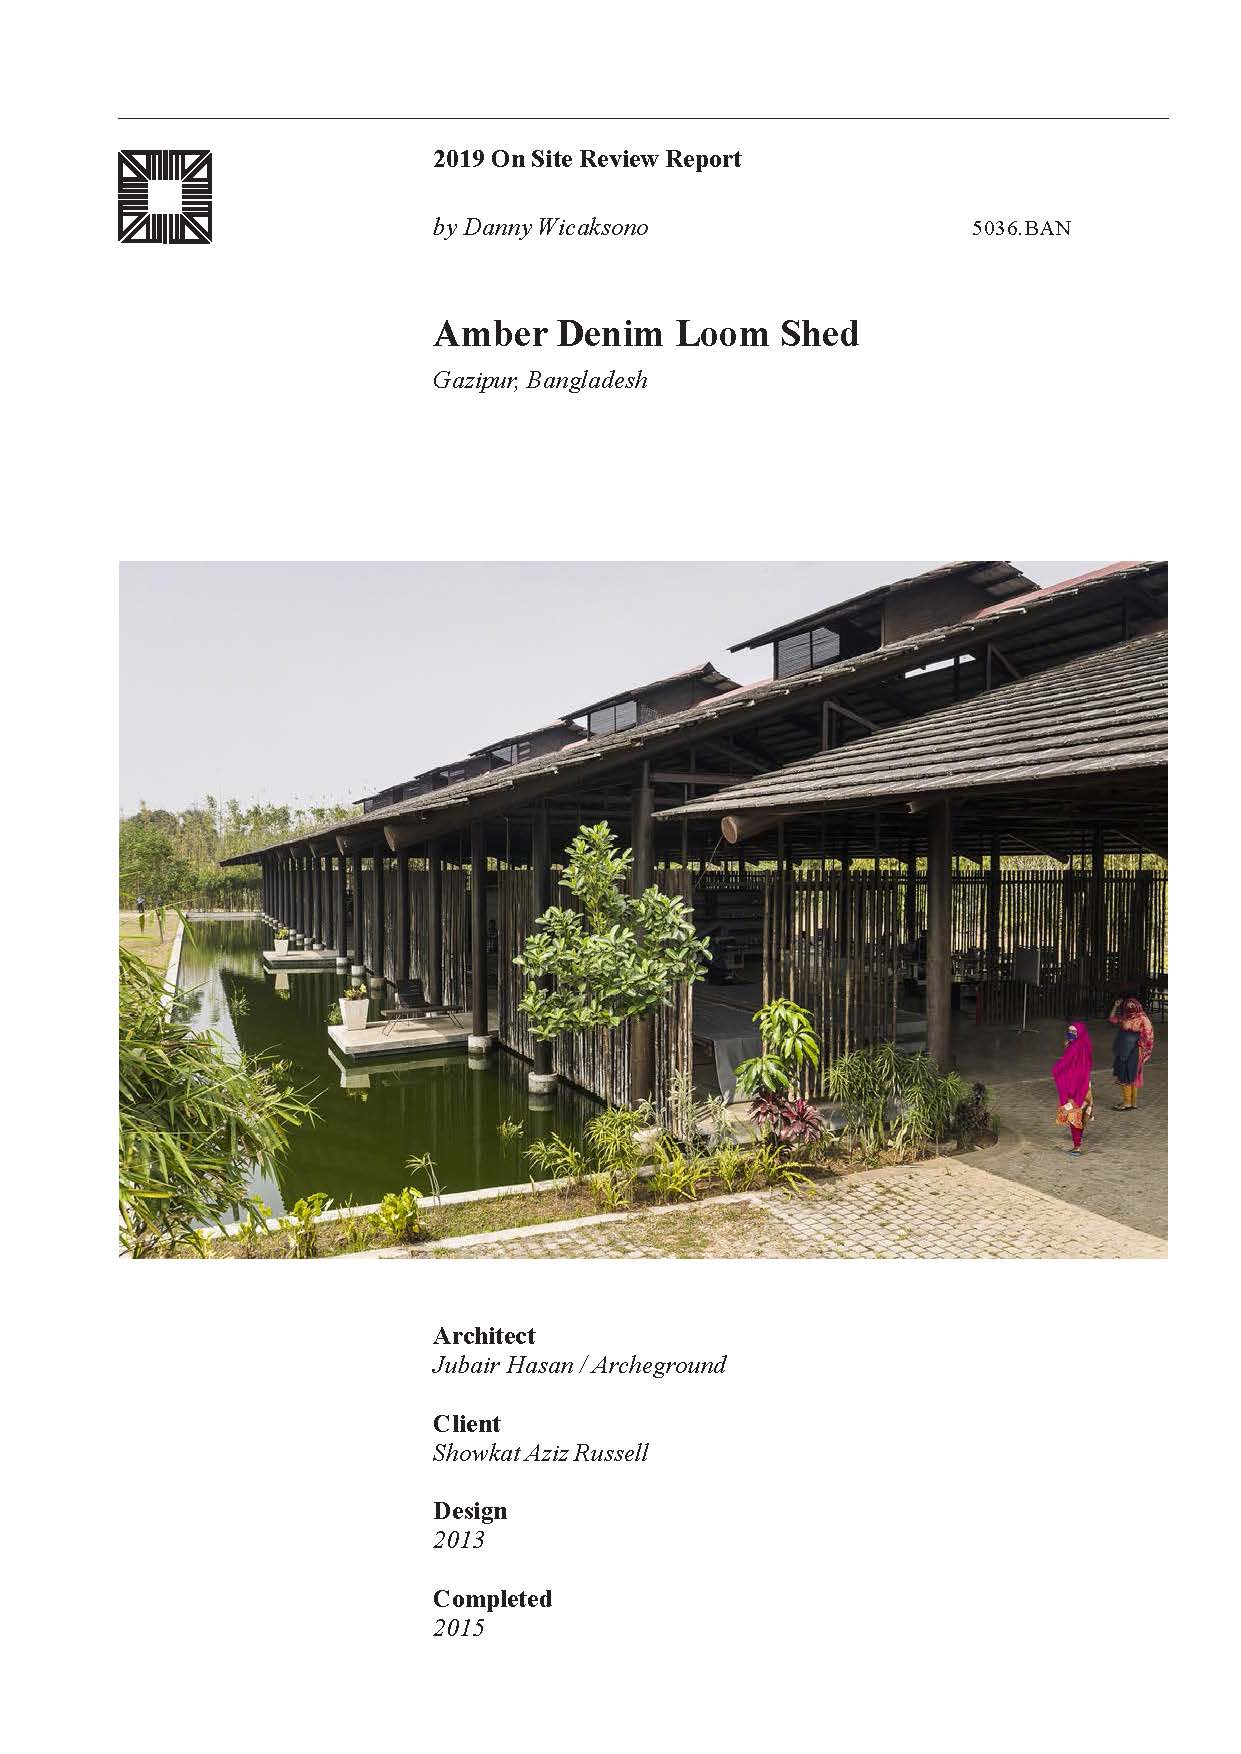 Amber Denim Loom Shed  - The On-site Review Report, formerly called the Technical Review, is a document prepared for the Aga Khan Award for Architecture by commissioned independent reviewers who report to the Master Jury about a specific shortlisted project. The reviewers are architectural professionals specialised in various disciplines, including housing, urban planning, landscape design, and restoration. Their task is to examine, on-site, the shortlisted projects to verify project data seek. The reviewers must consider a detailed set of criteria in their written reports, and must also respond to the specific concerns and questions prepared by the Master Jury for each project. This process is intensive and exhaustive making the Aga Khan Award process entirely unique.